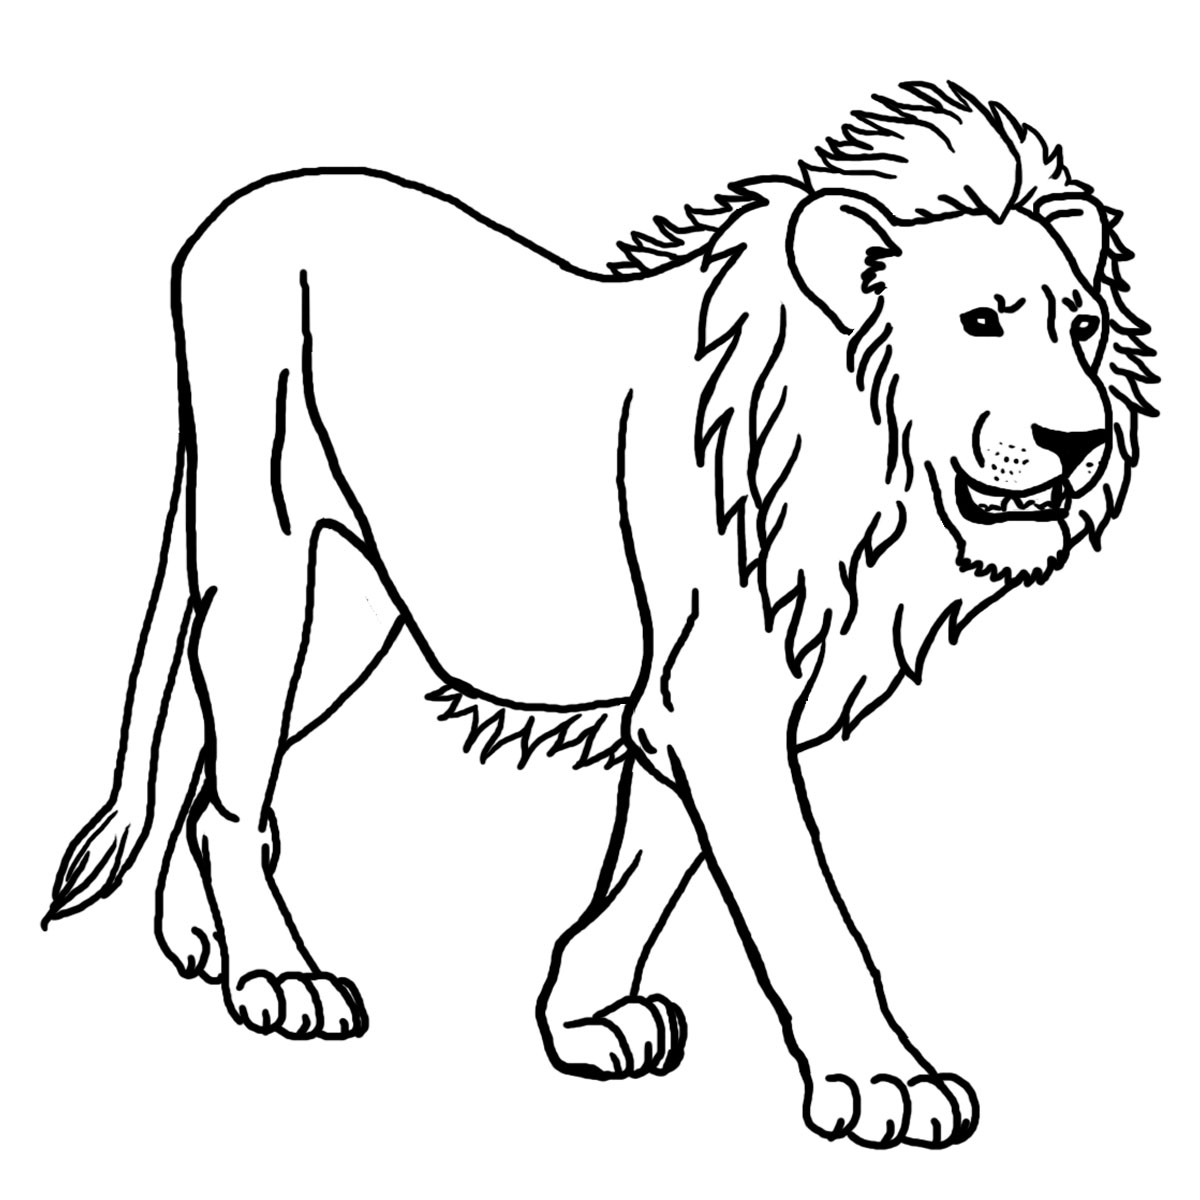 lion-free-to-color-for-children-lion-kids-coloring-pages